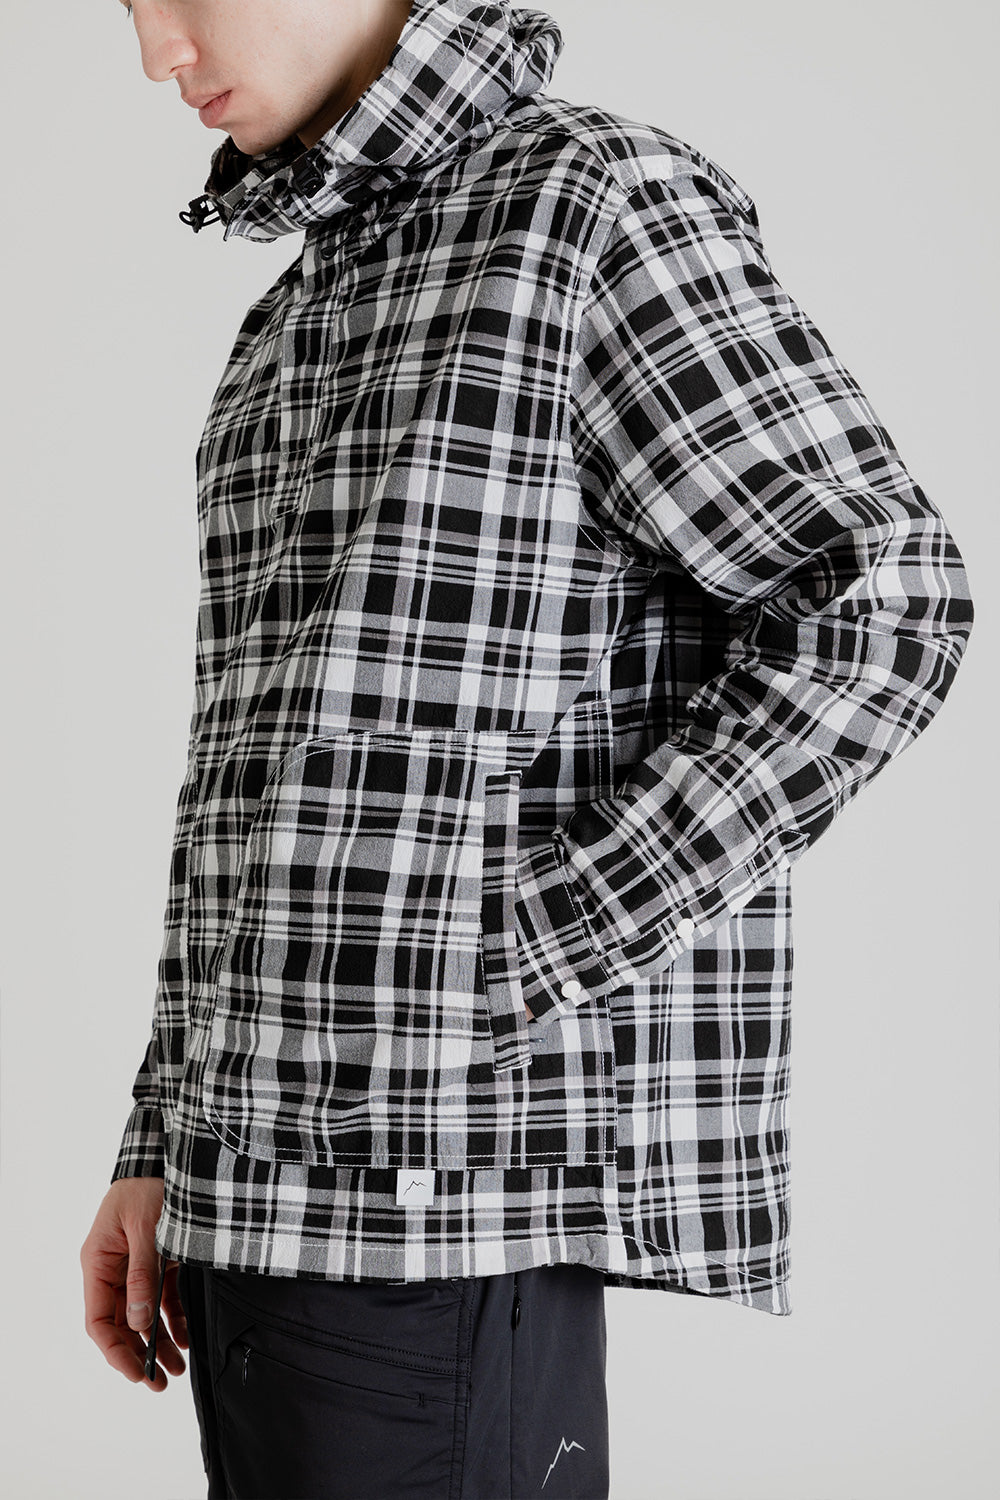 CAYL Light Cotton Pullover Hoody in Black Check